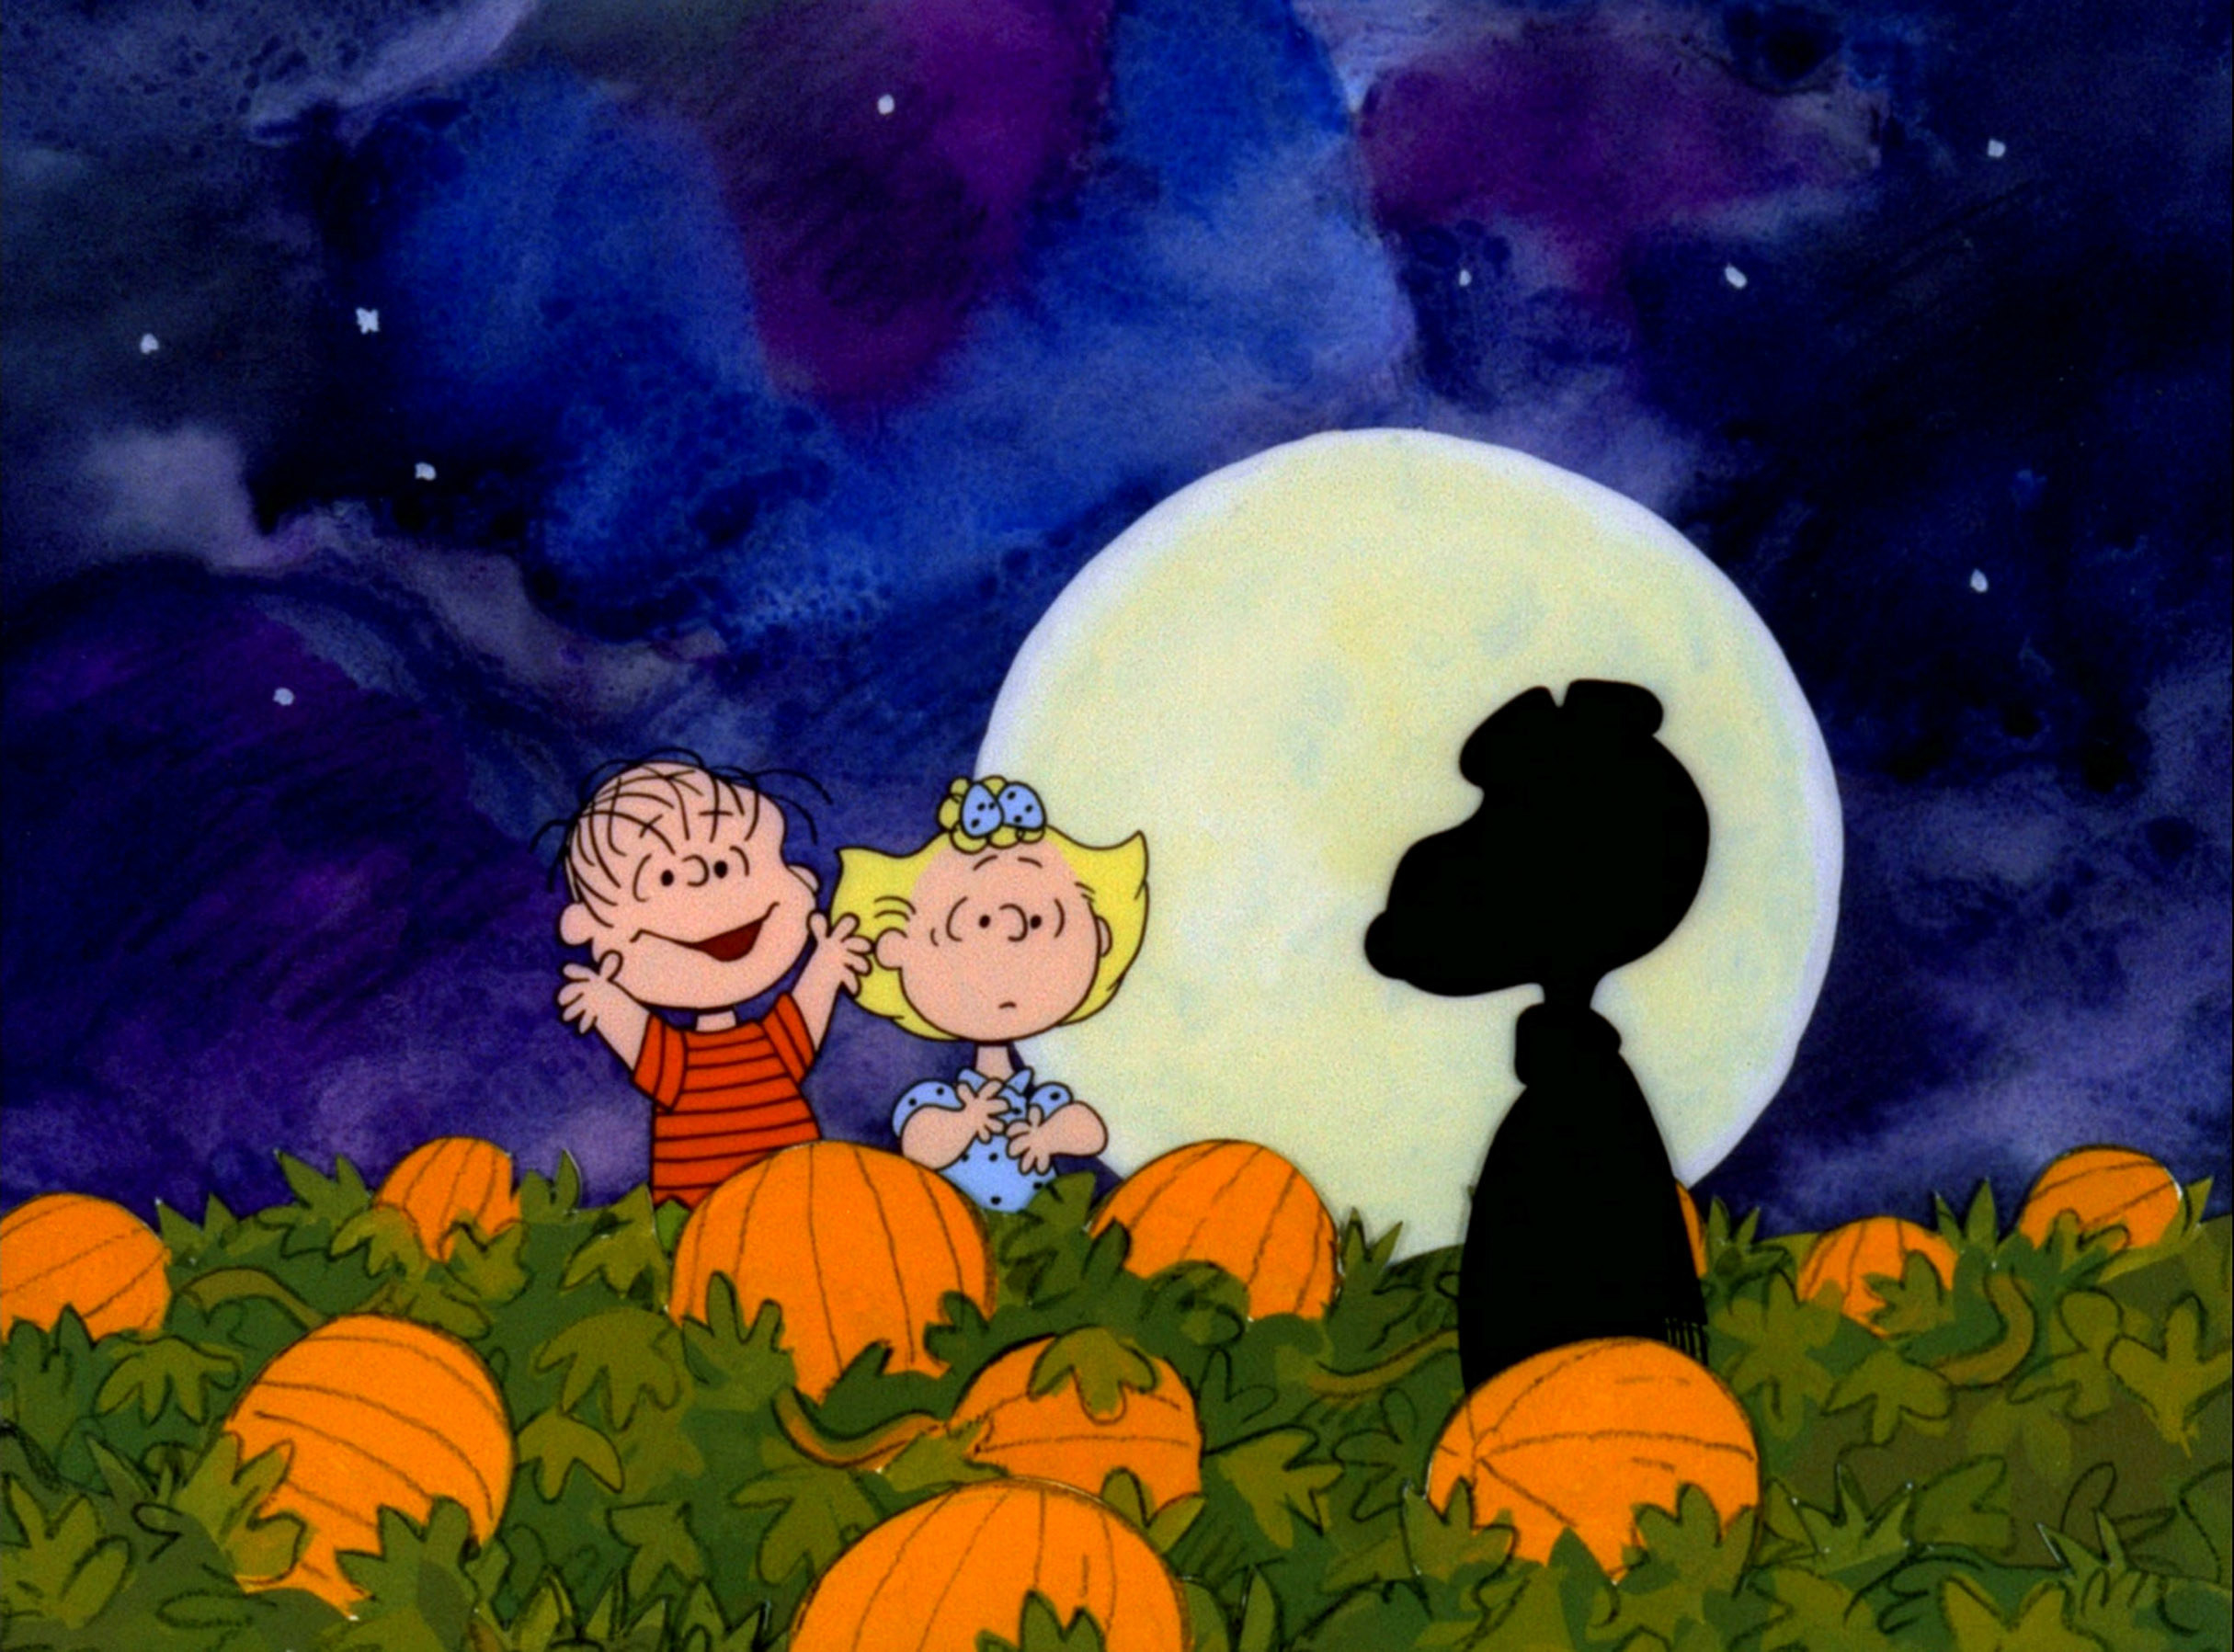 Linus, Sally, and Snoopy standing in a pumpkin patch